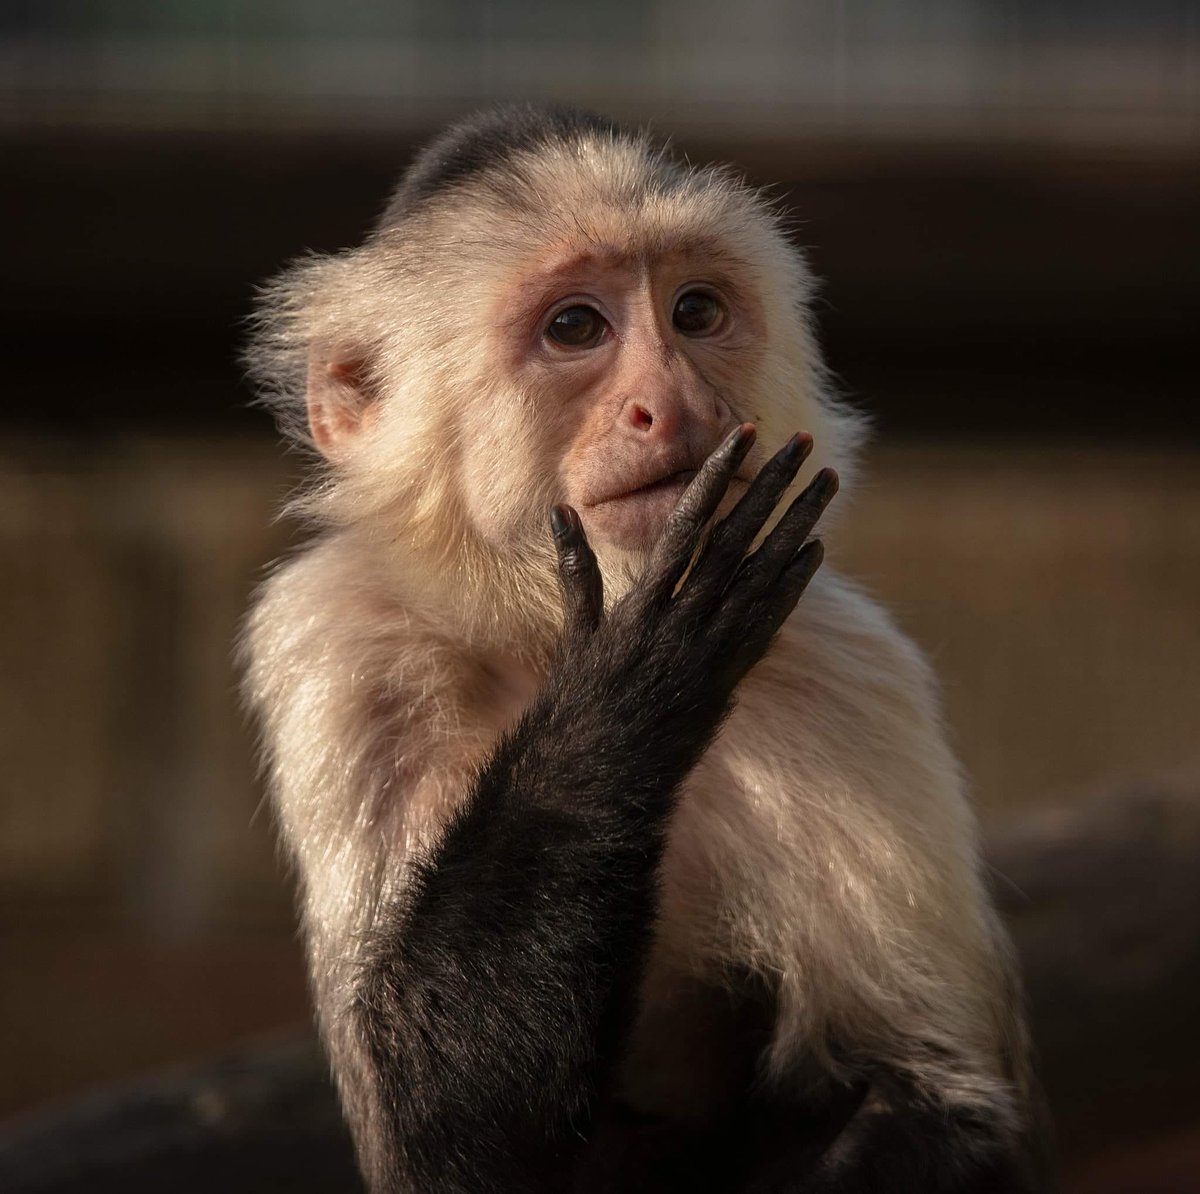 The Capuchins can’t stop thinking about Easter! 💛 Only 3 more sleeps until the egg hunt begins!! 🙈🪺💛

monkeyhaven.org/news/
#easter #egghunt #capuchin #sanctuary #isleofwight